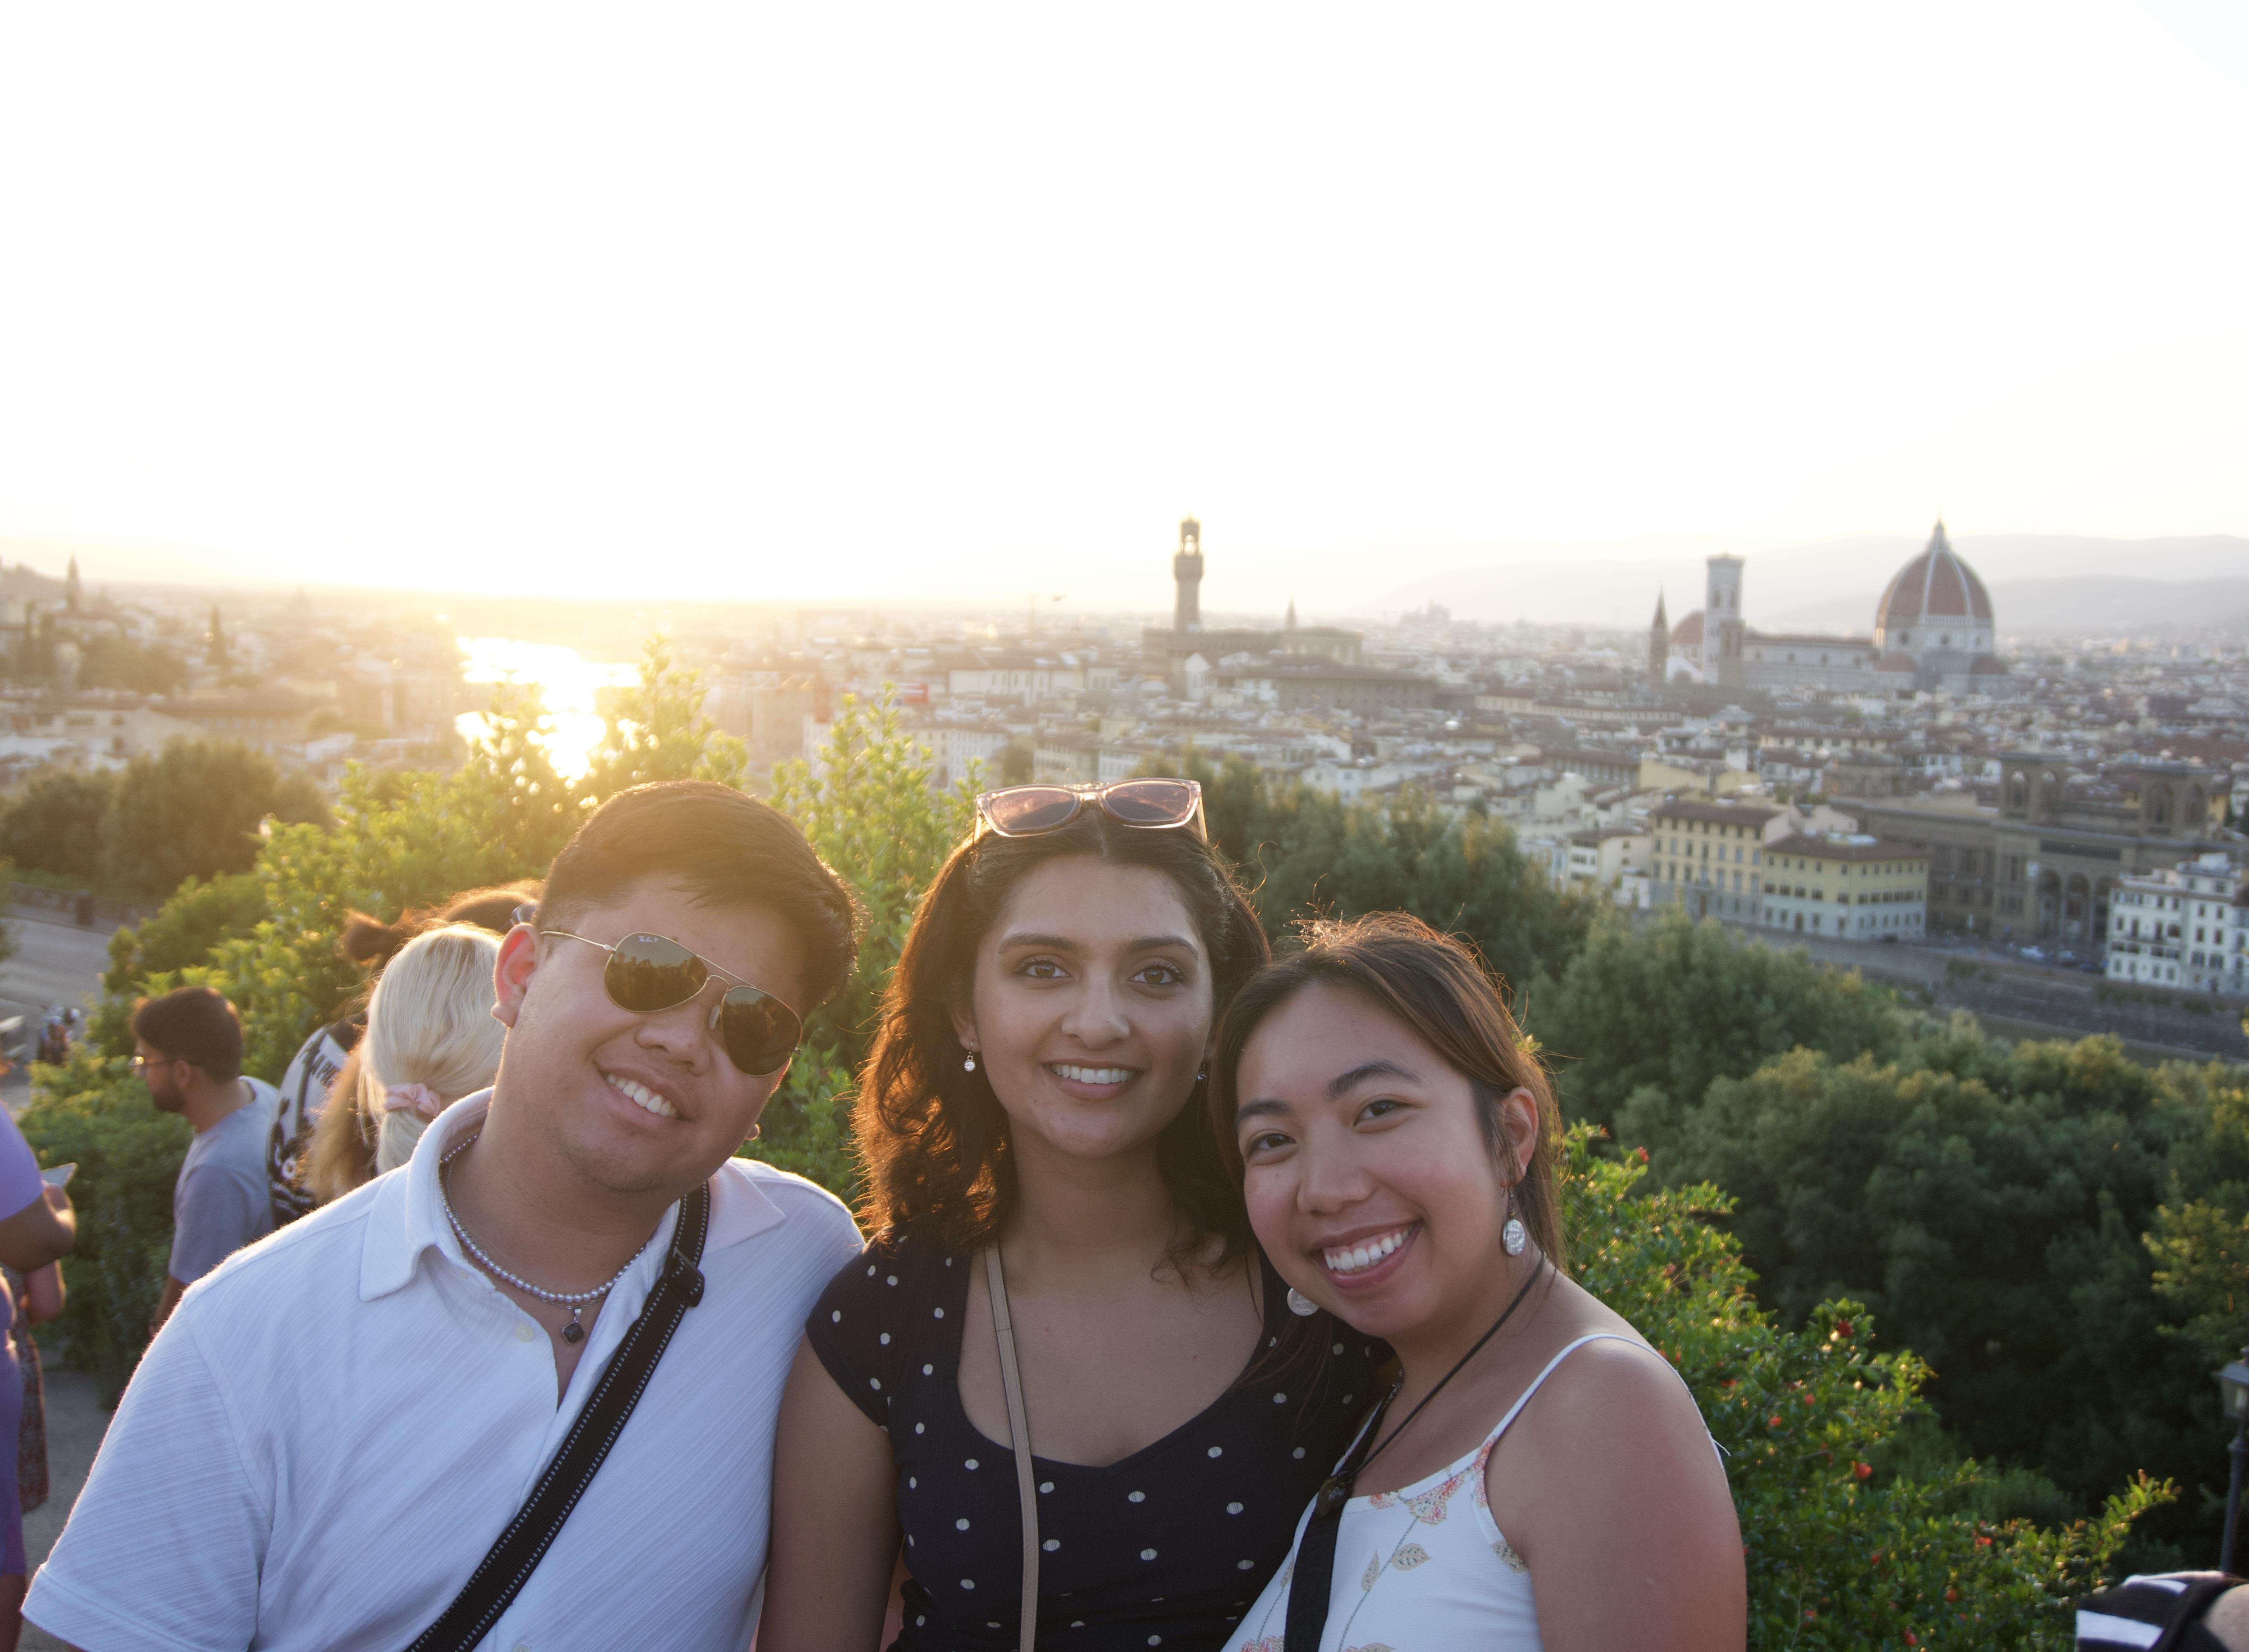 Students at sunset in Florence, Italy